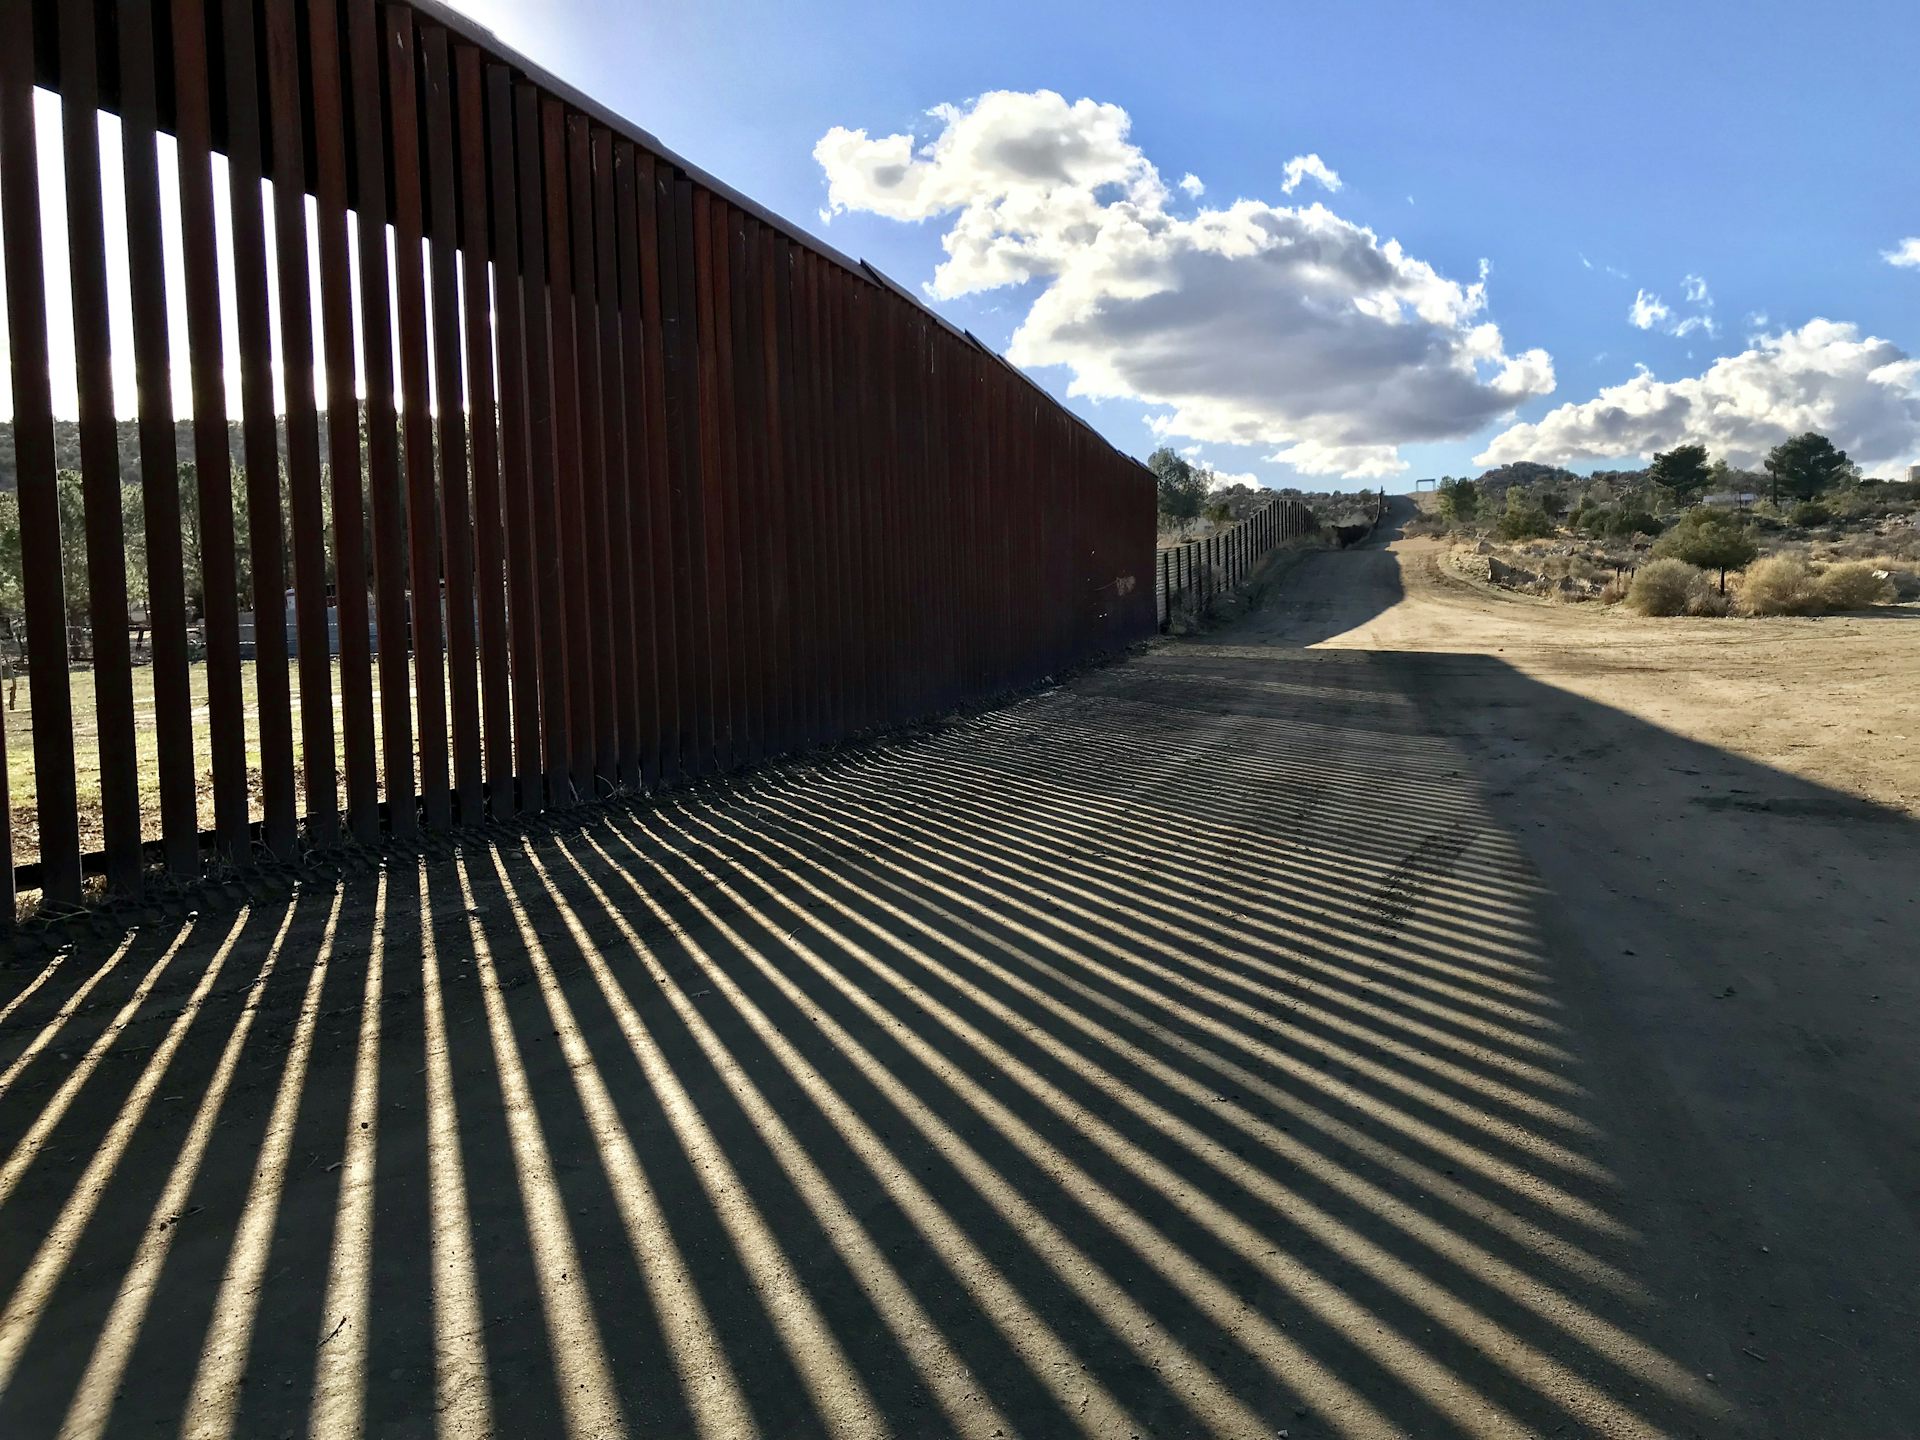 Thousands of Asylum Seekers Left Waiting at the U.S.-Mexico Border